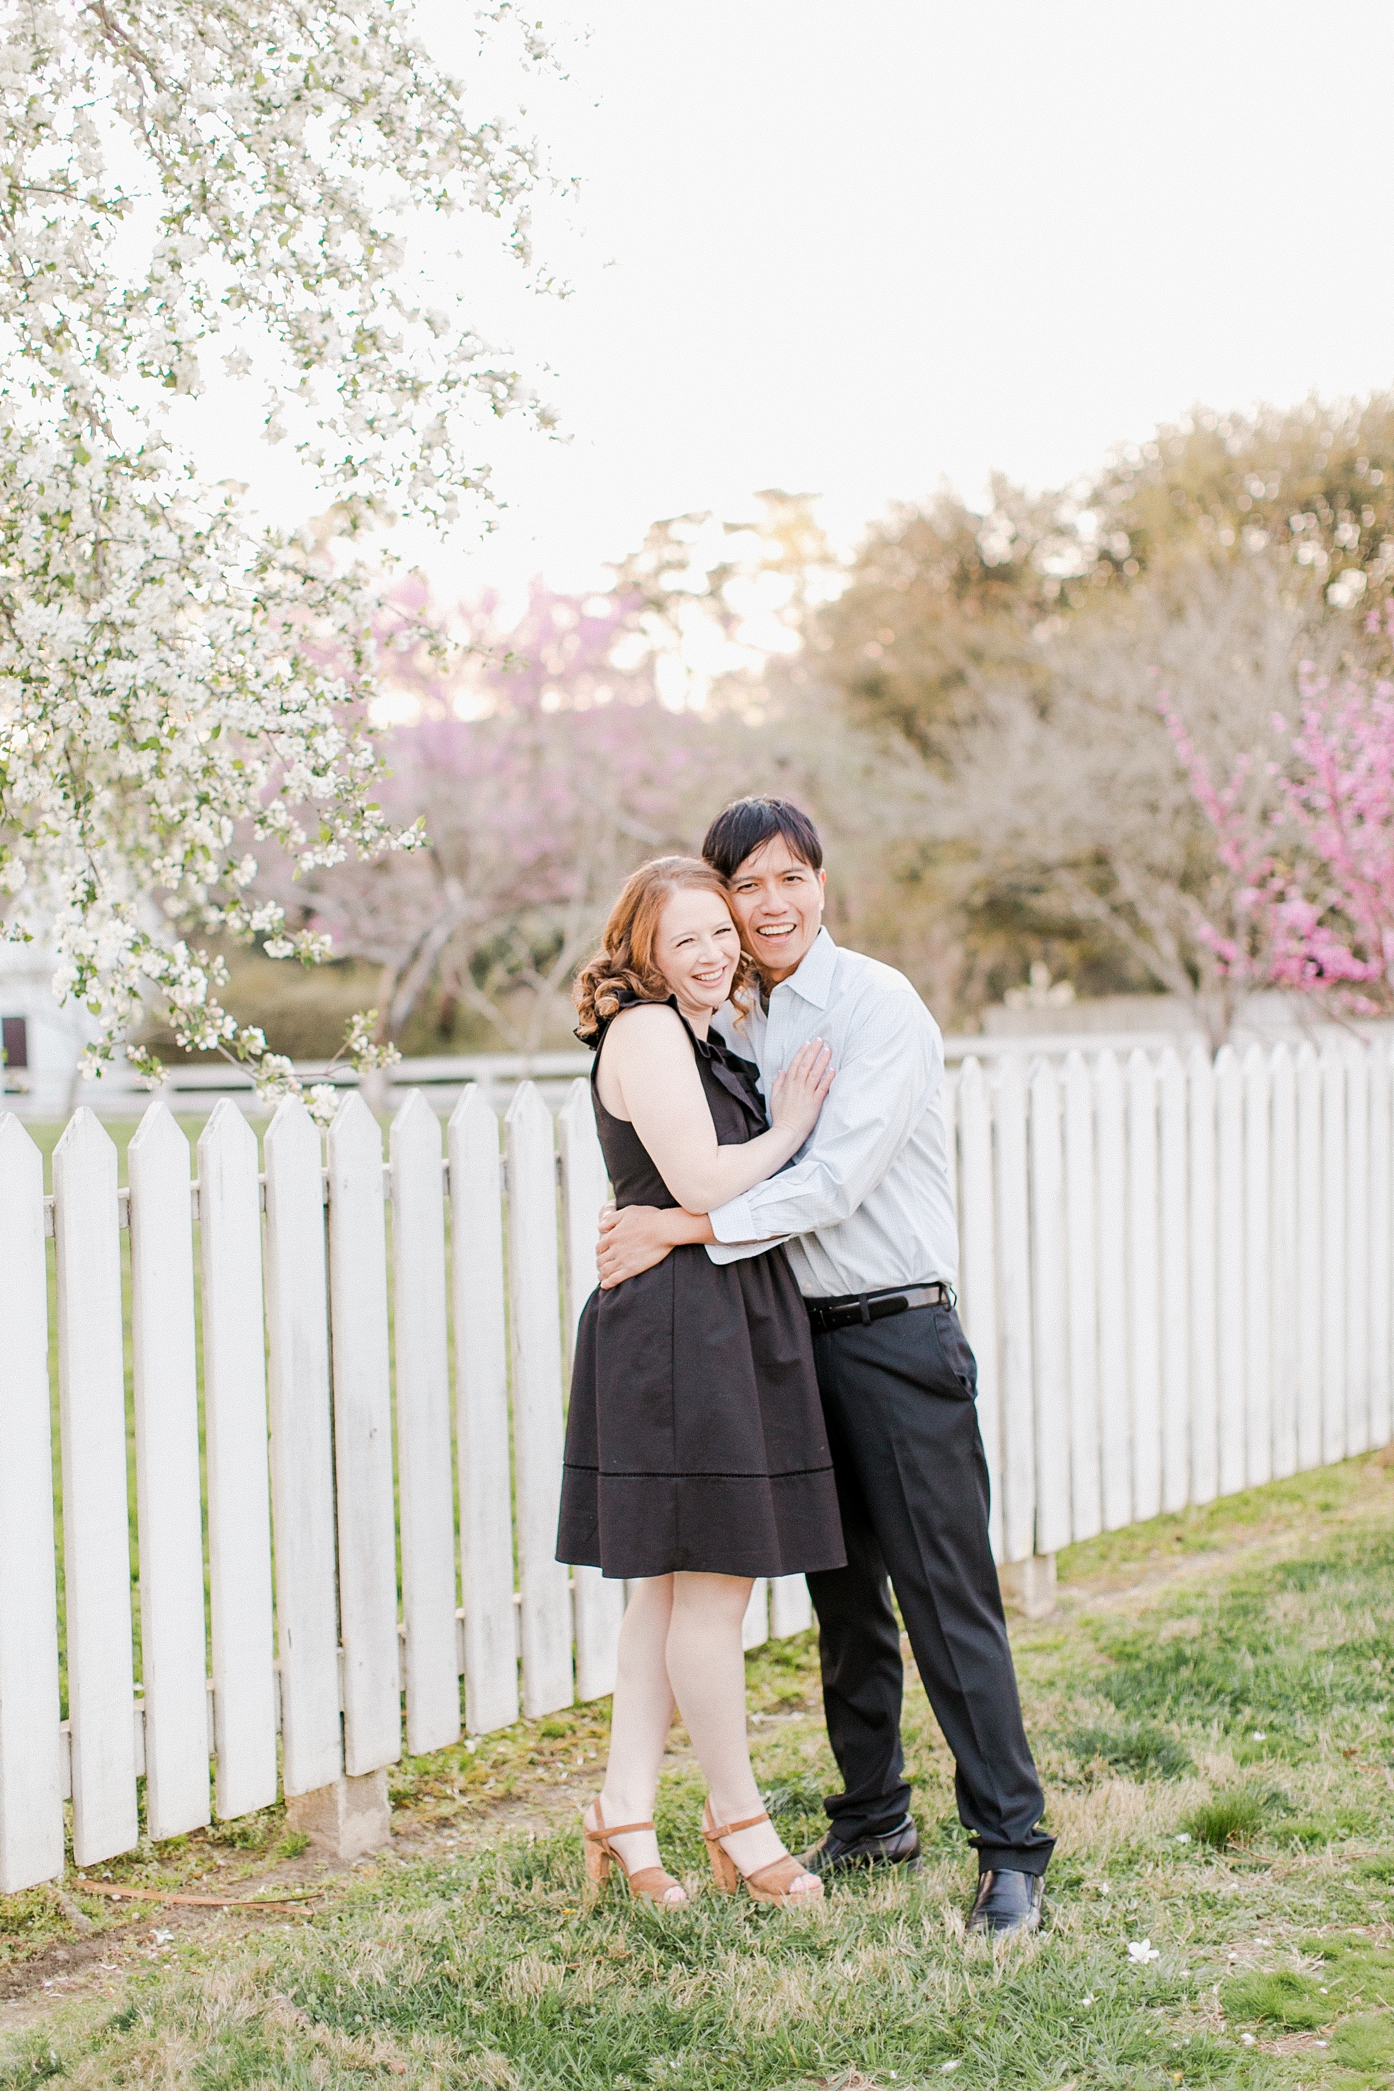 Colonial Williamsburg Engagement Session in the Gardens